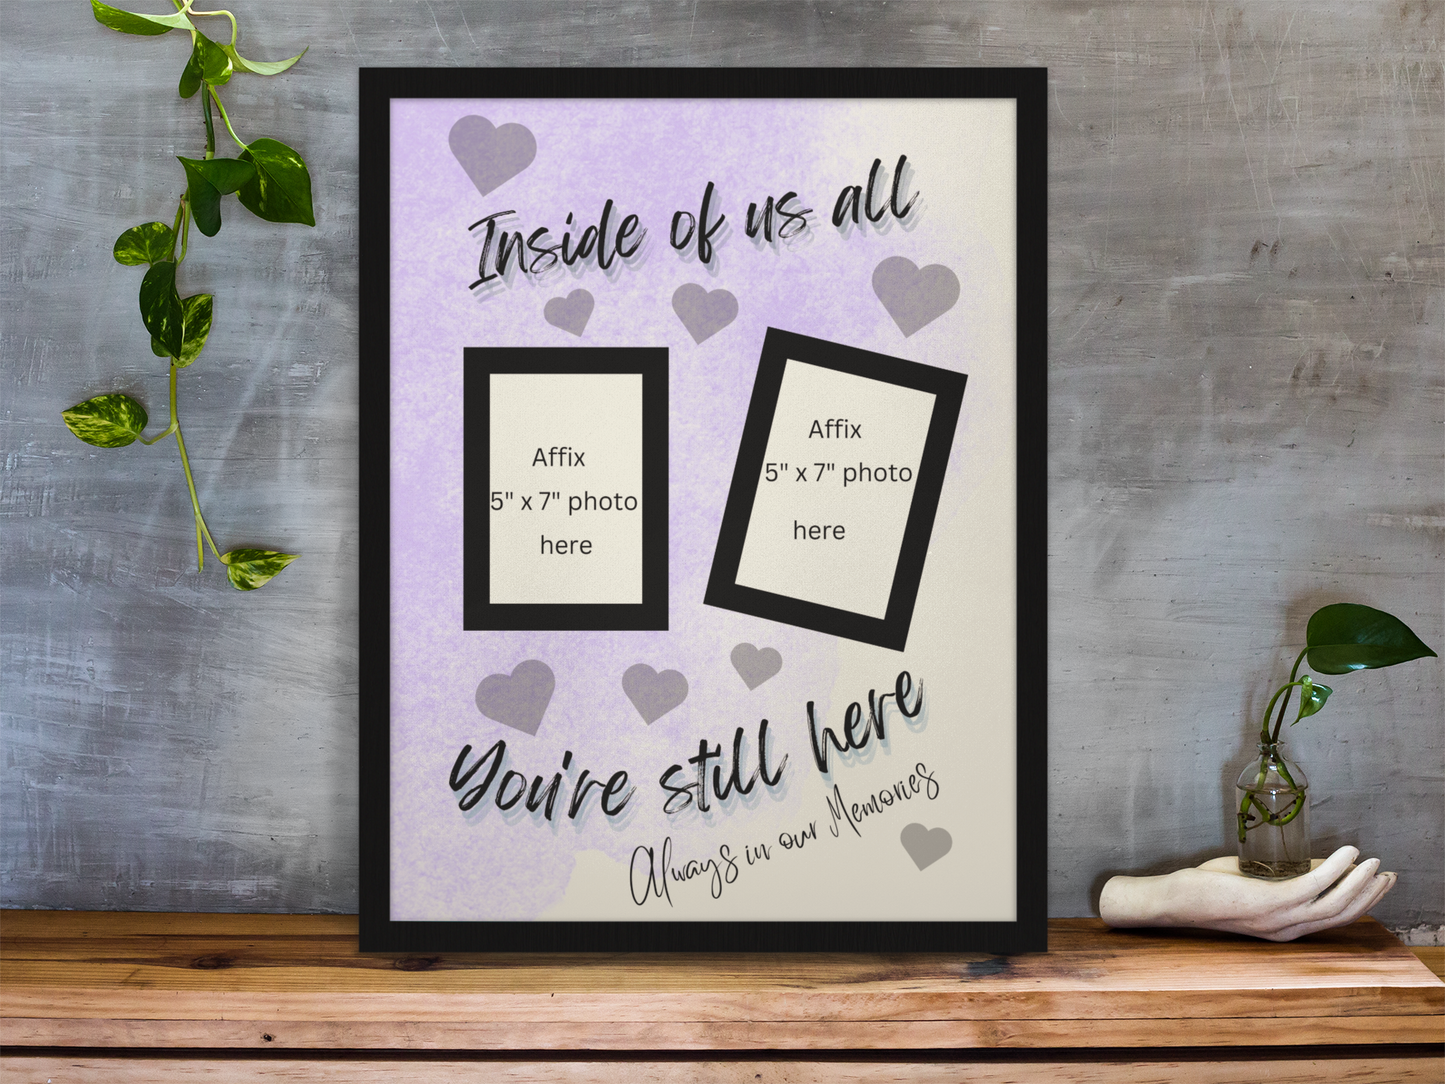 MEMORY of a LOVED ONE - QUIRKY UNIQUE WALL ART in PURPLE tones, featuring heartfelt words of love to remember them always.